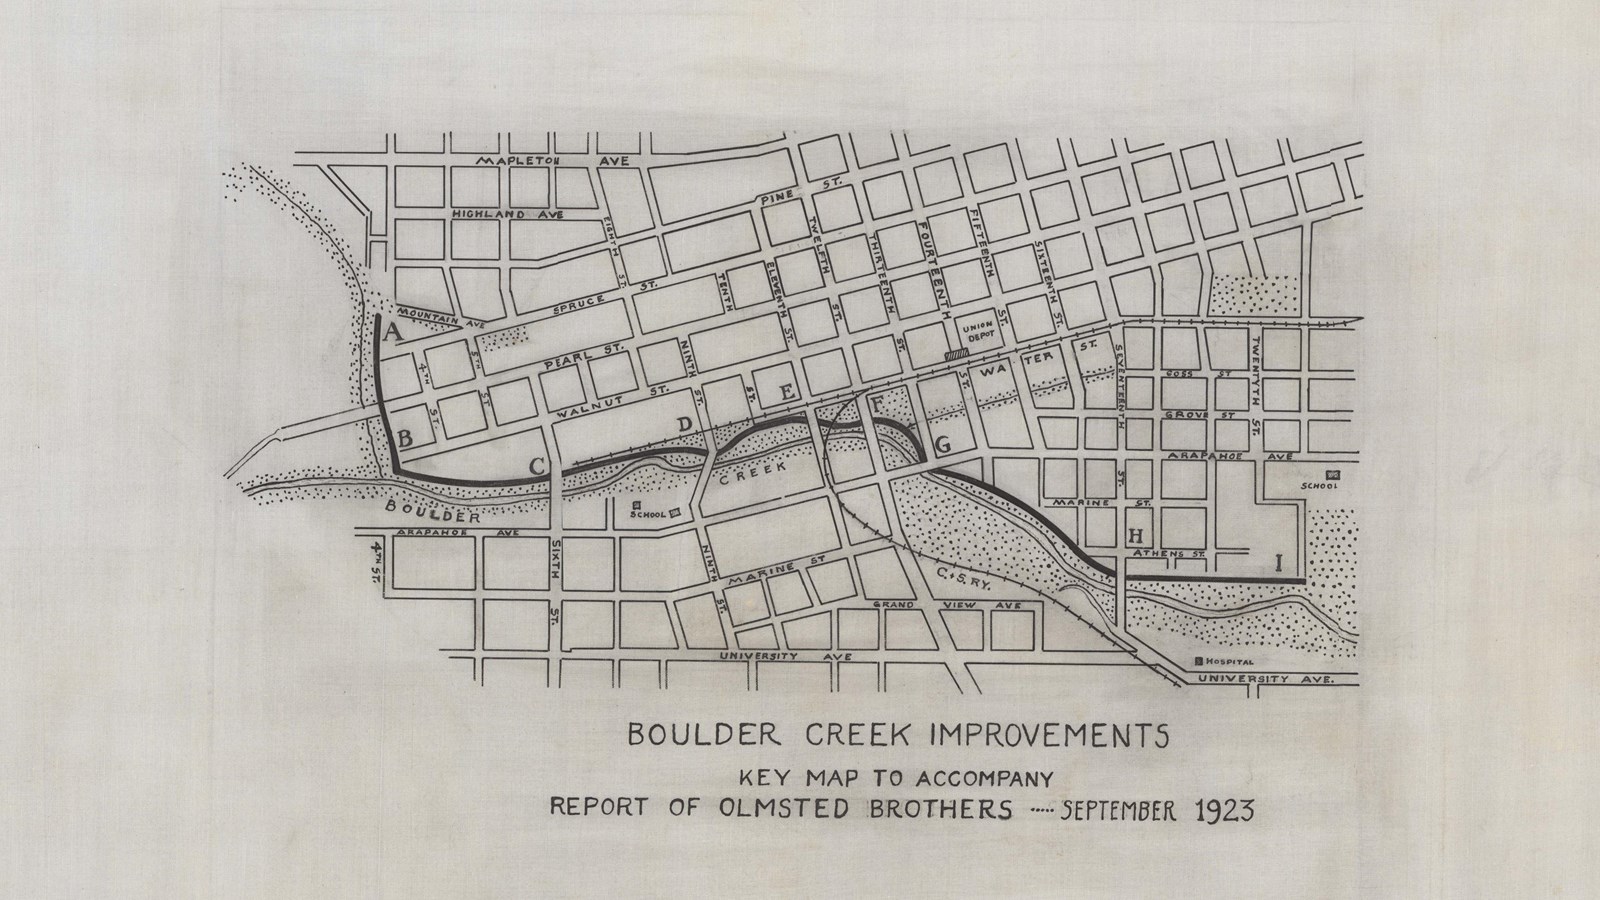 Pencil drawing of curving creek cutting through grid like city streets 